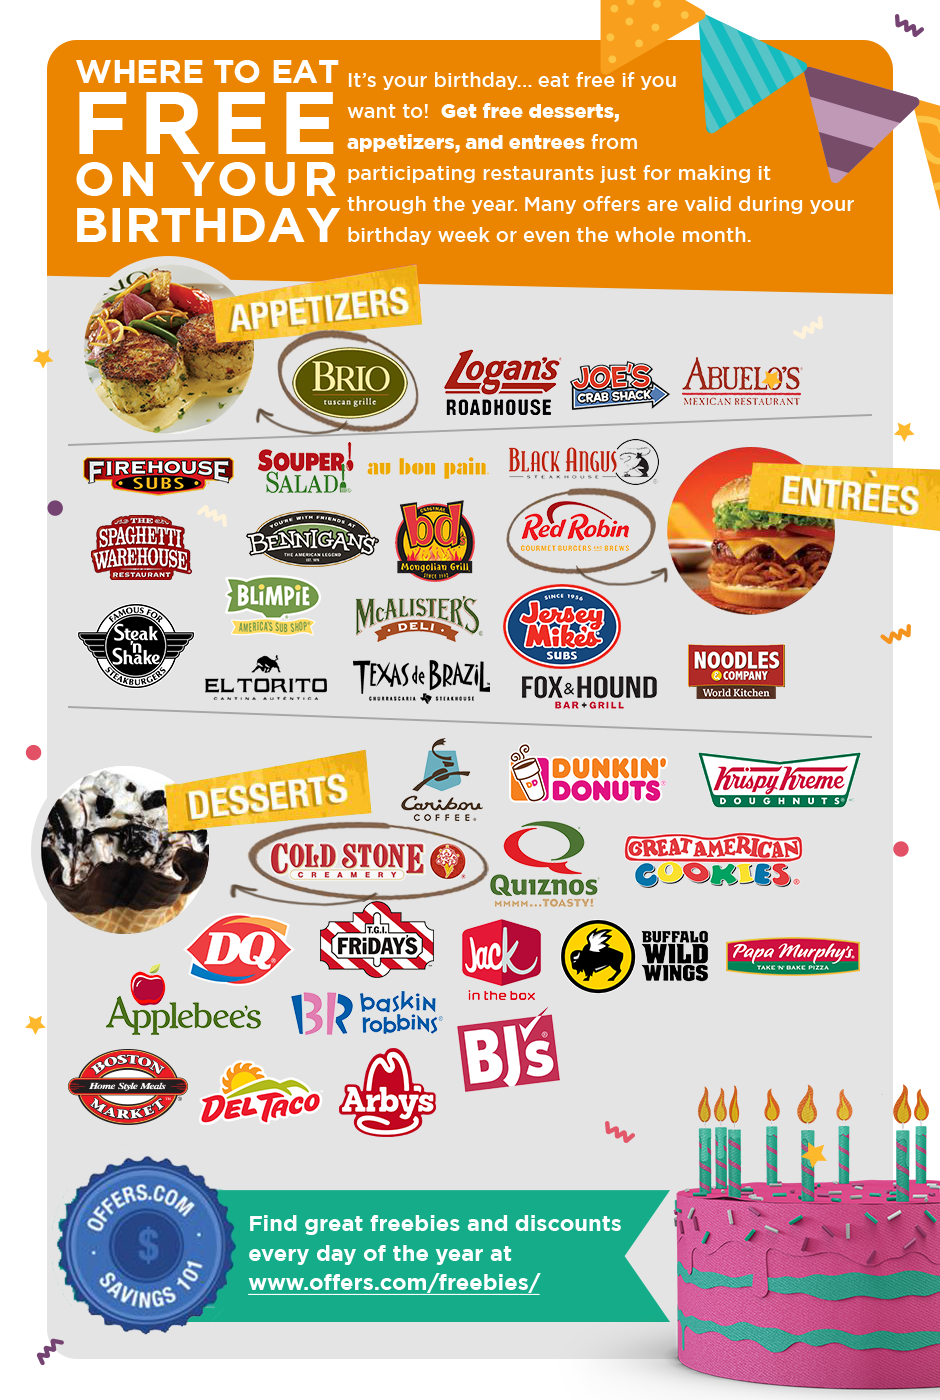 Free Birthday Meals 2019 - Restaurant W/ Free Food On Your Birthday - Free Printable Coupons For Bojangles